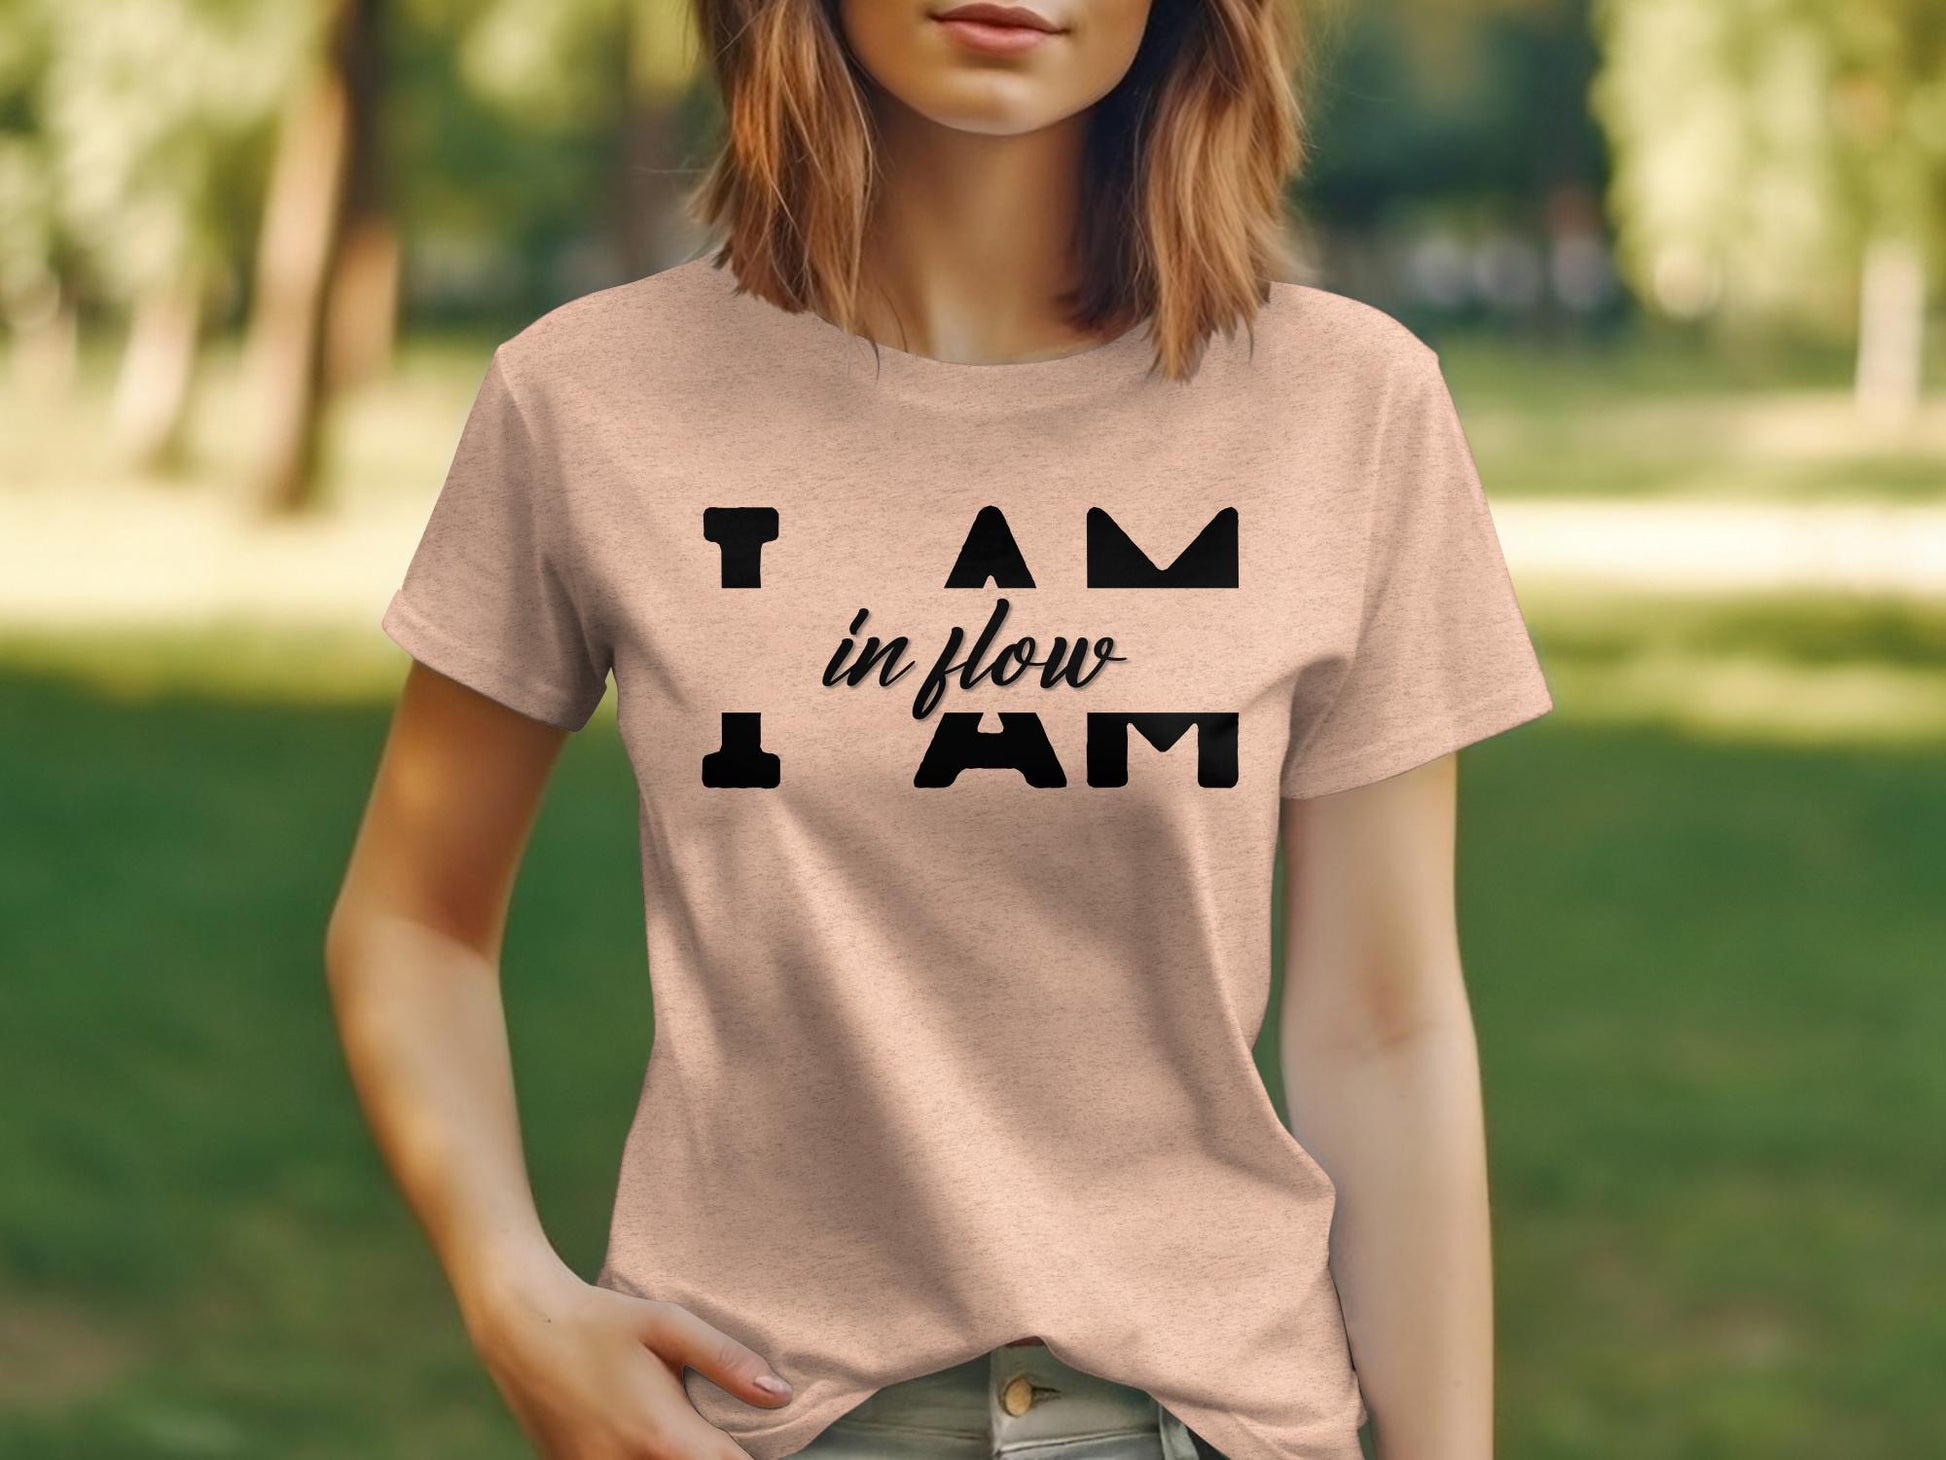 I Am in Flow - An encouraging and motivating Affirmation Quote T-shirt